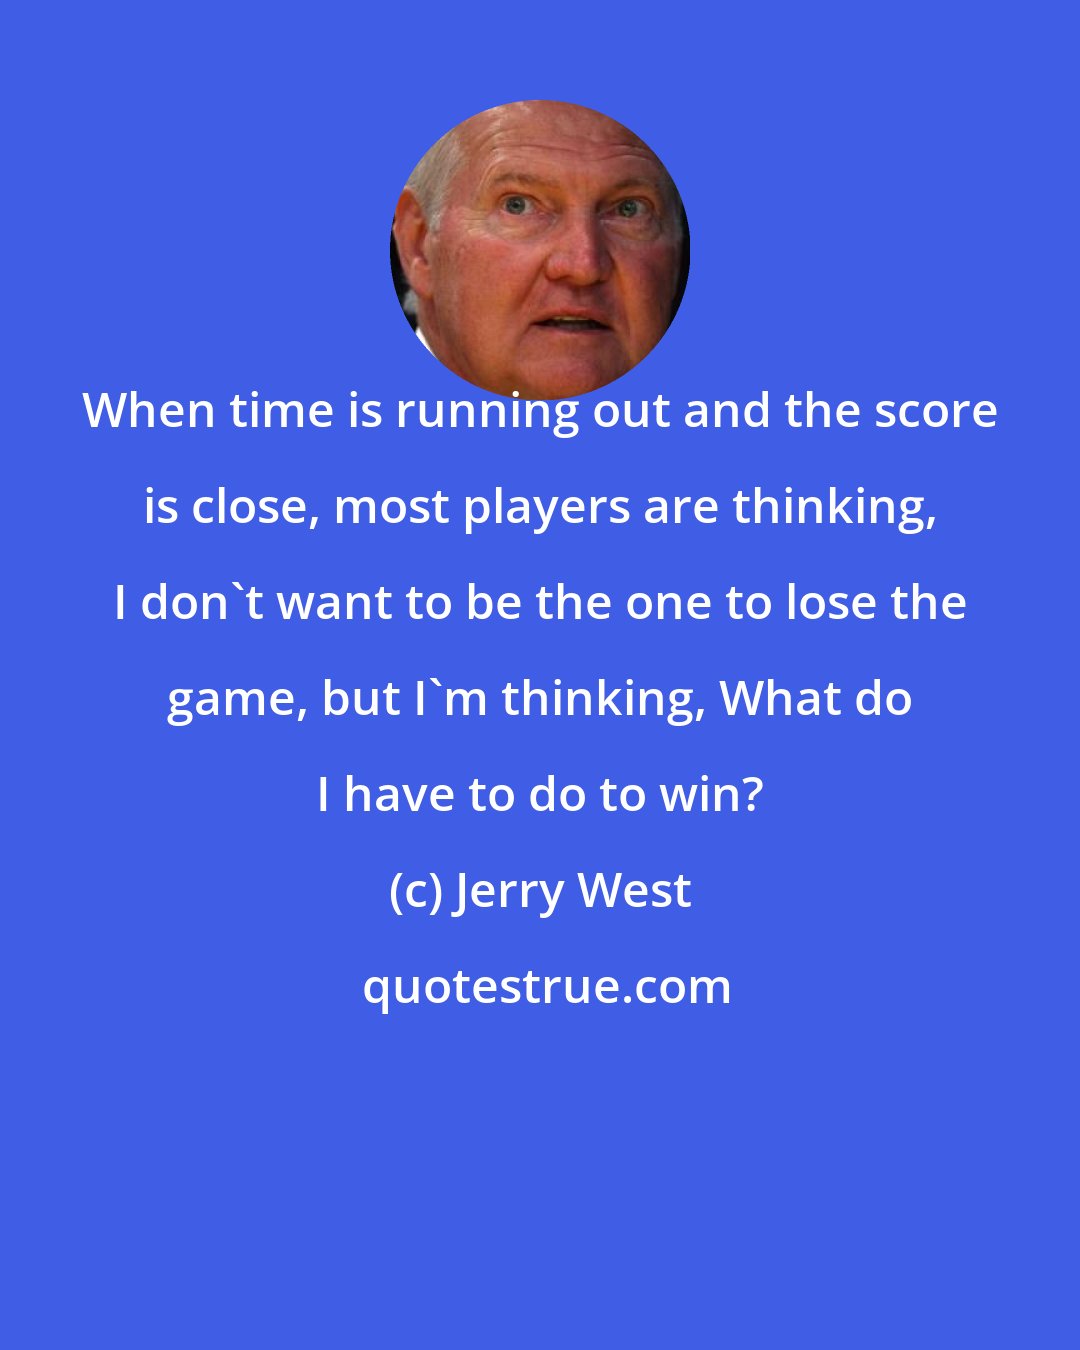 Jerry West: When time is running out and the score is close, most players are thinking, I don't want to be the one to lose the game, but I'm thinking, What do I have to do to win?